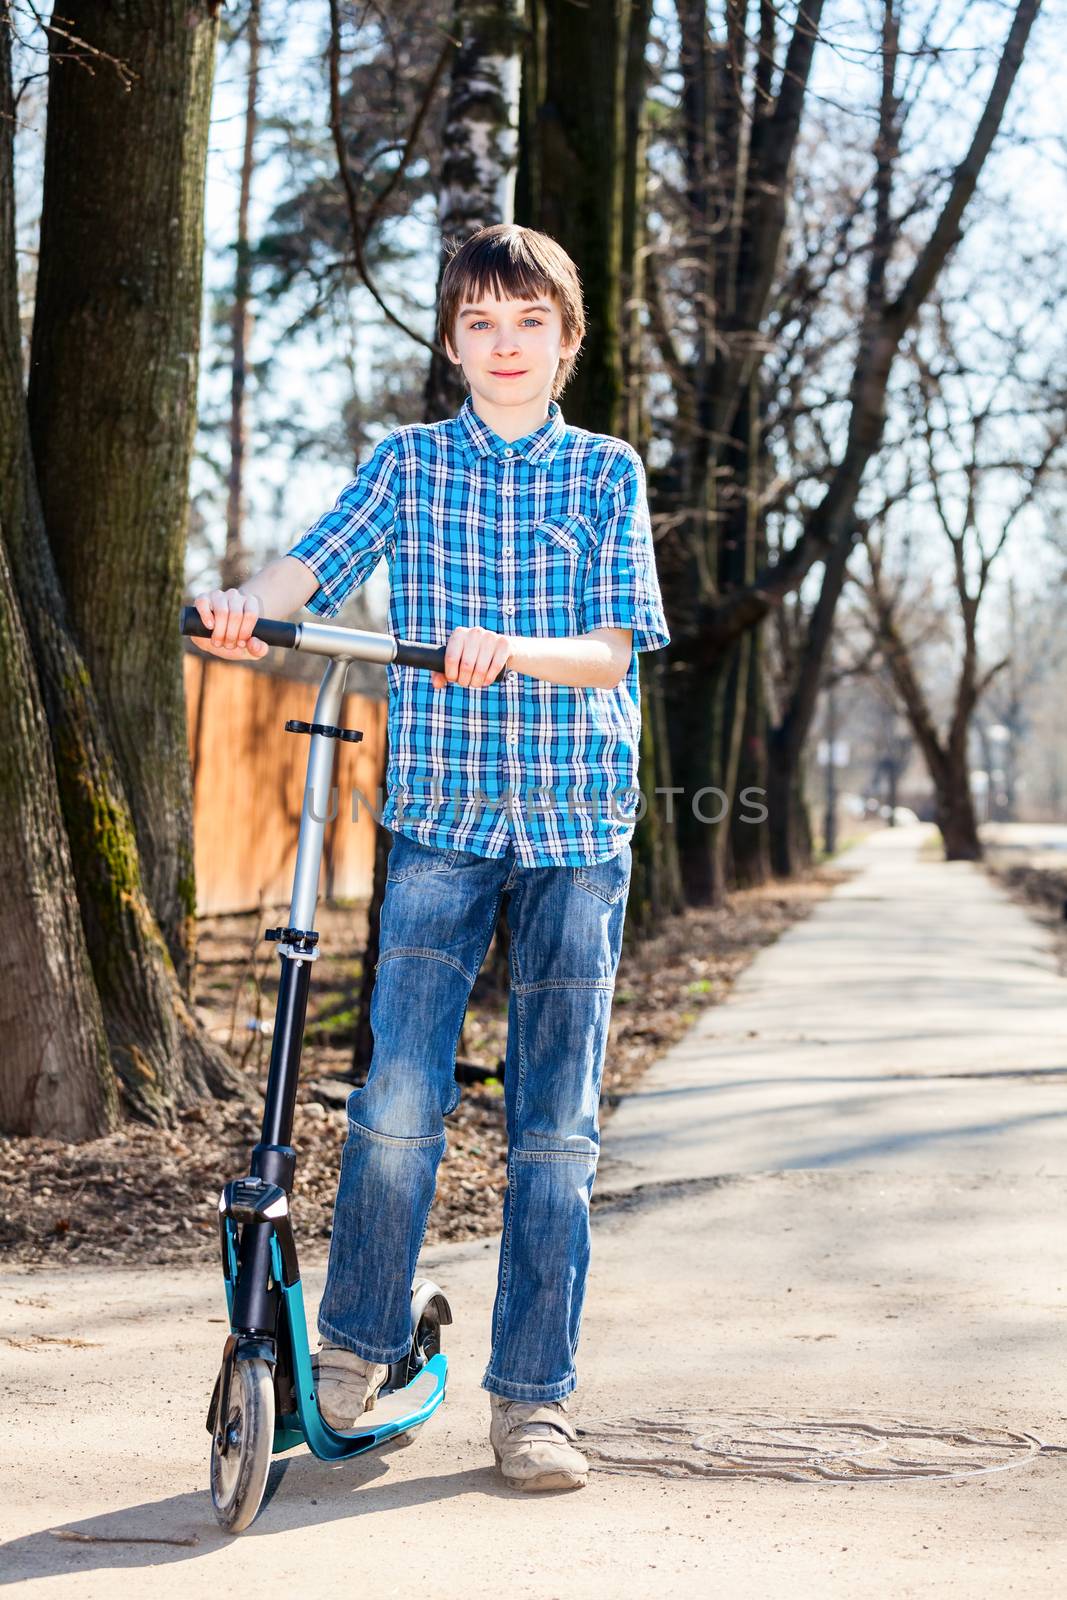 Cute boy standing with his push scooter outdoors